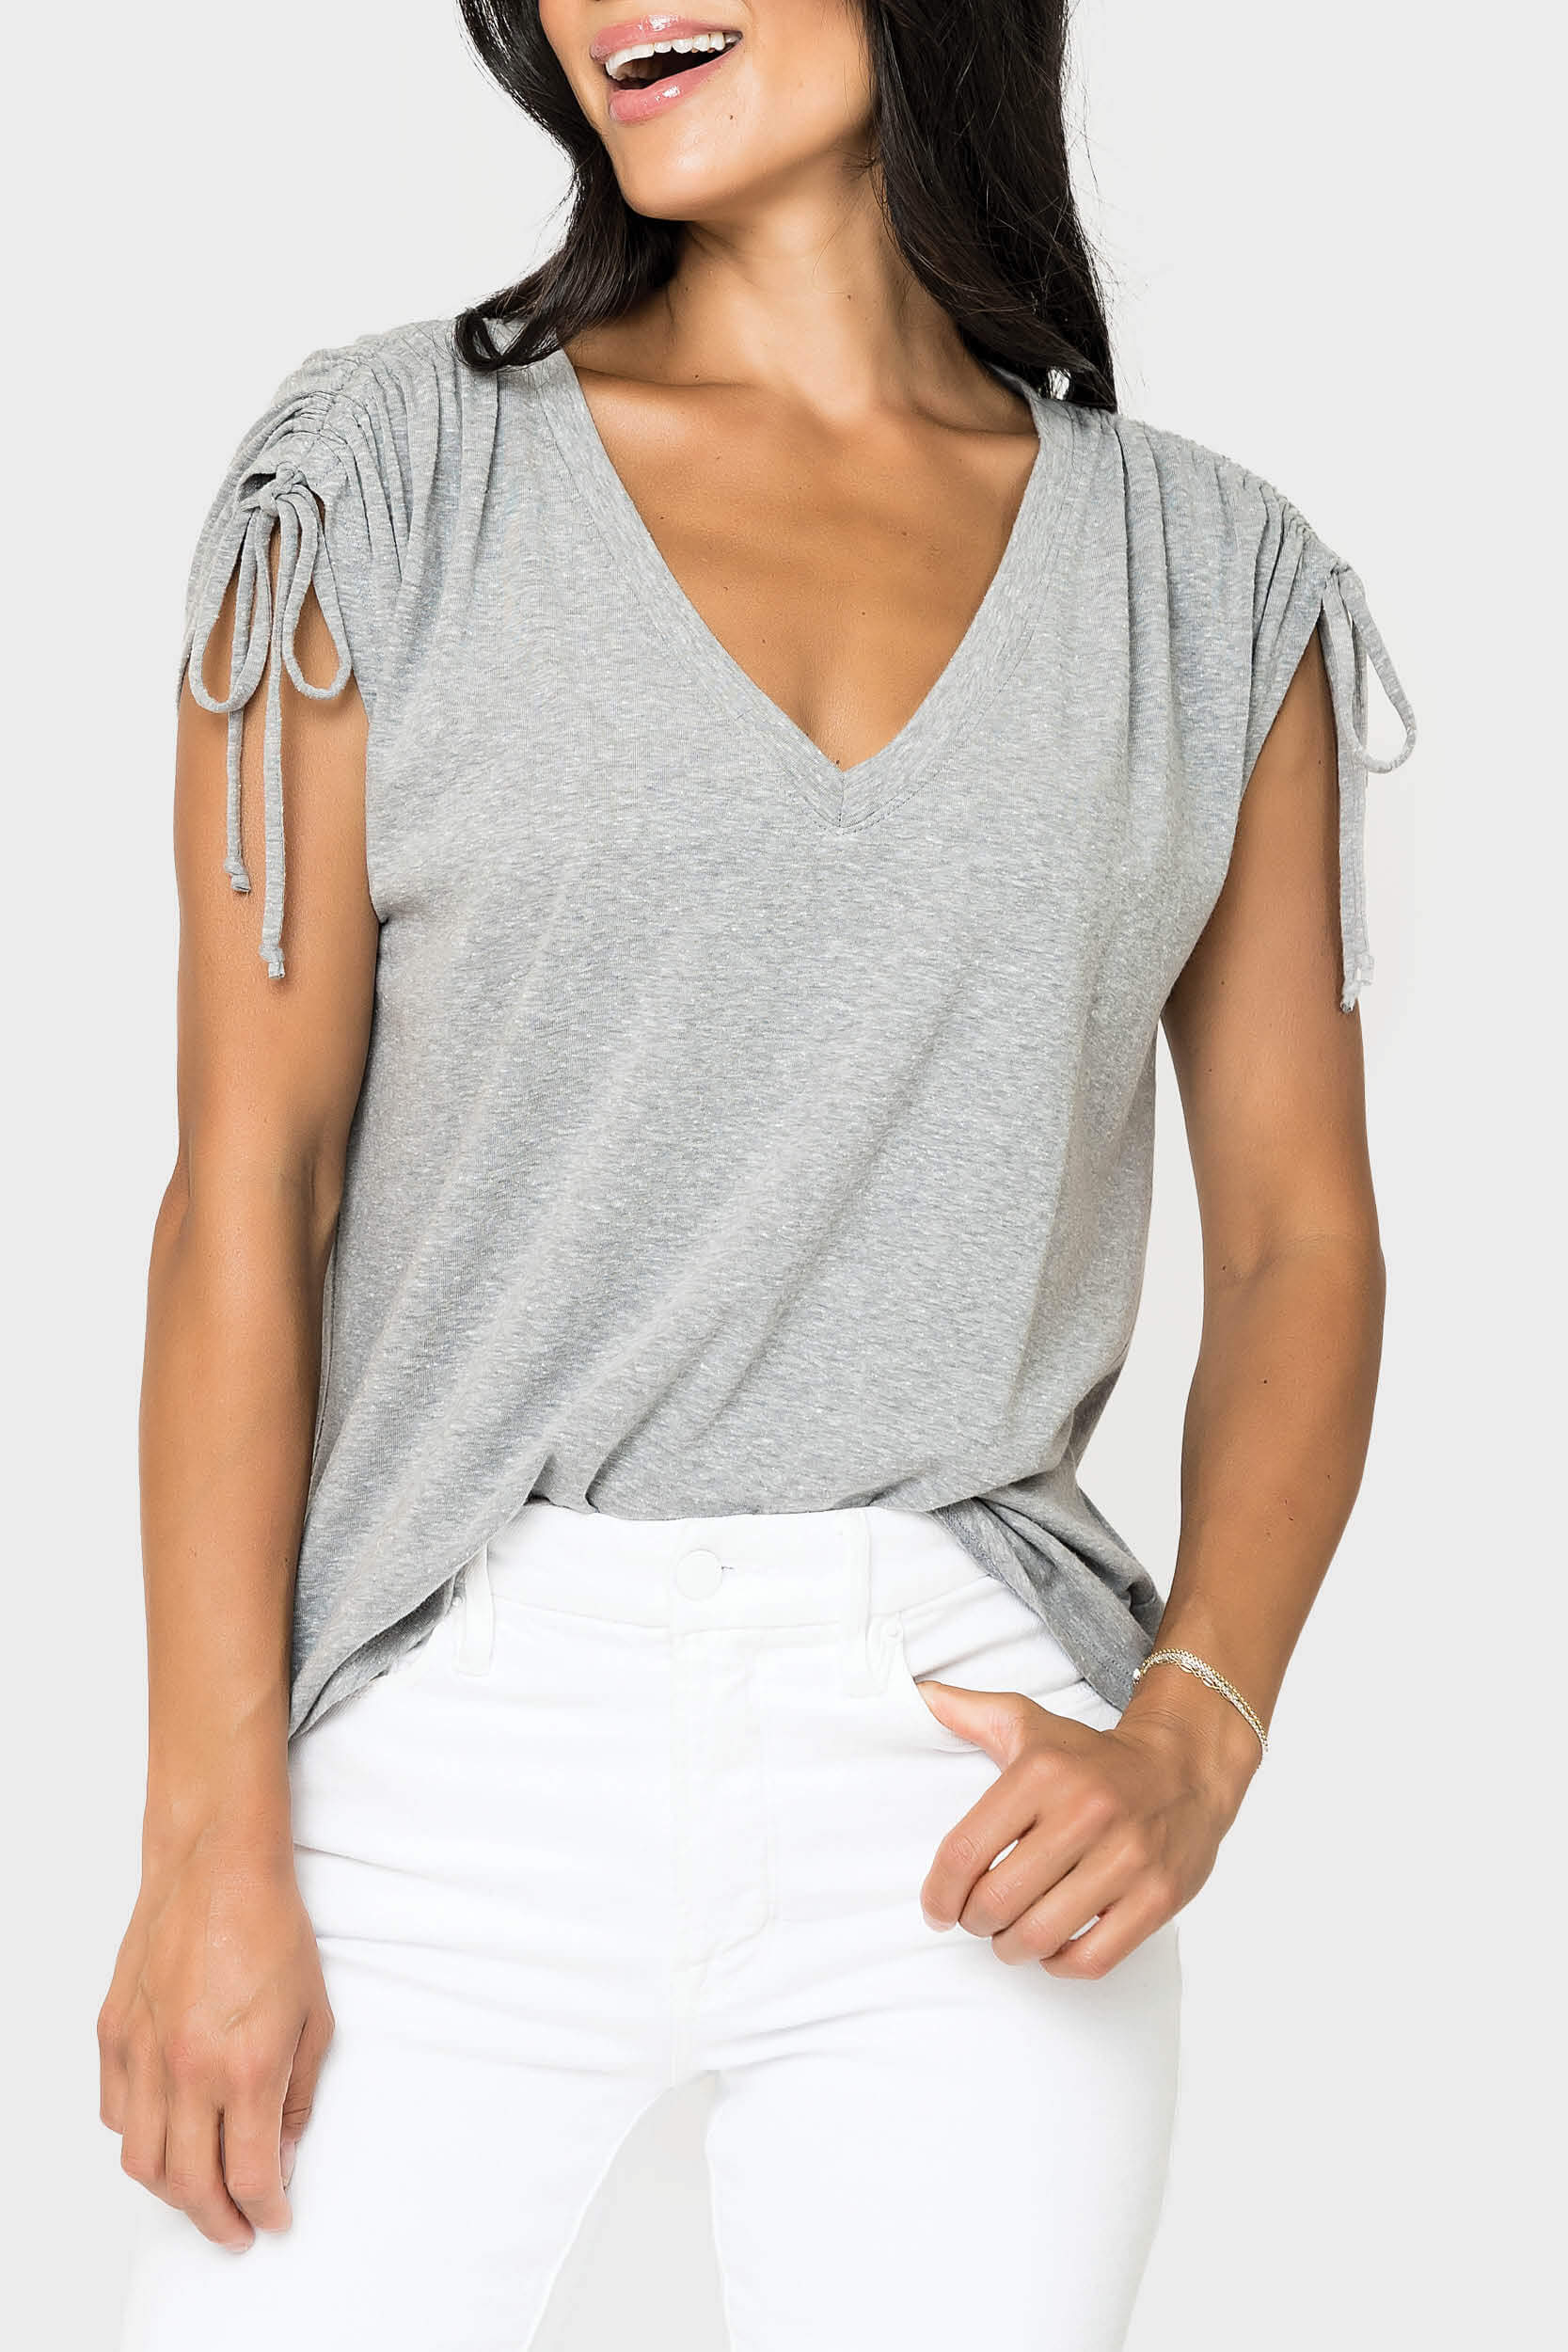 Front of women wearing the Rouched Sleeve Luxe V-Neck Tee in heather grey